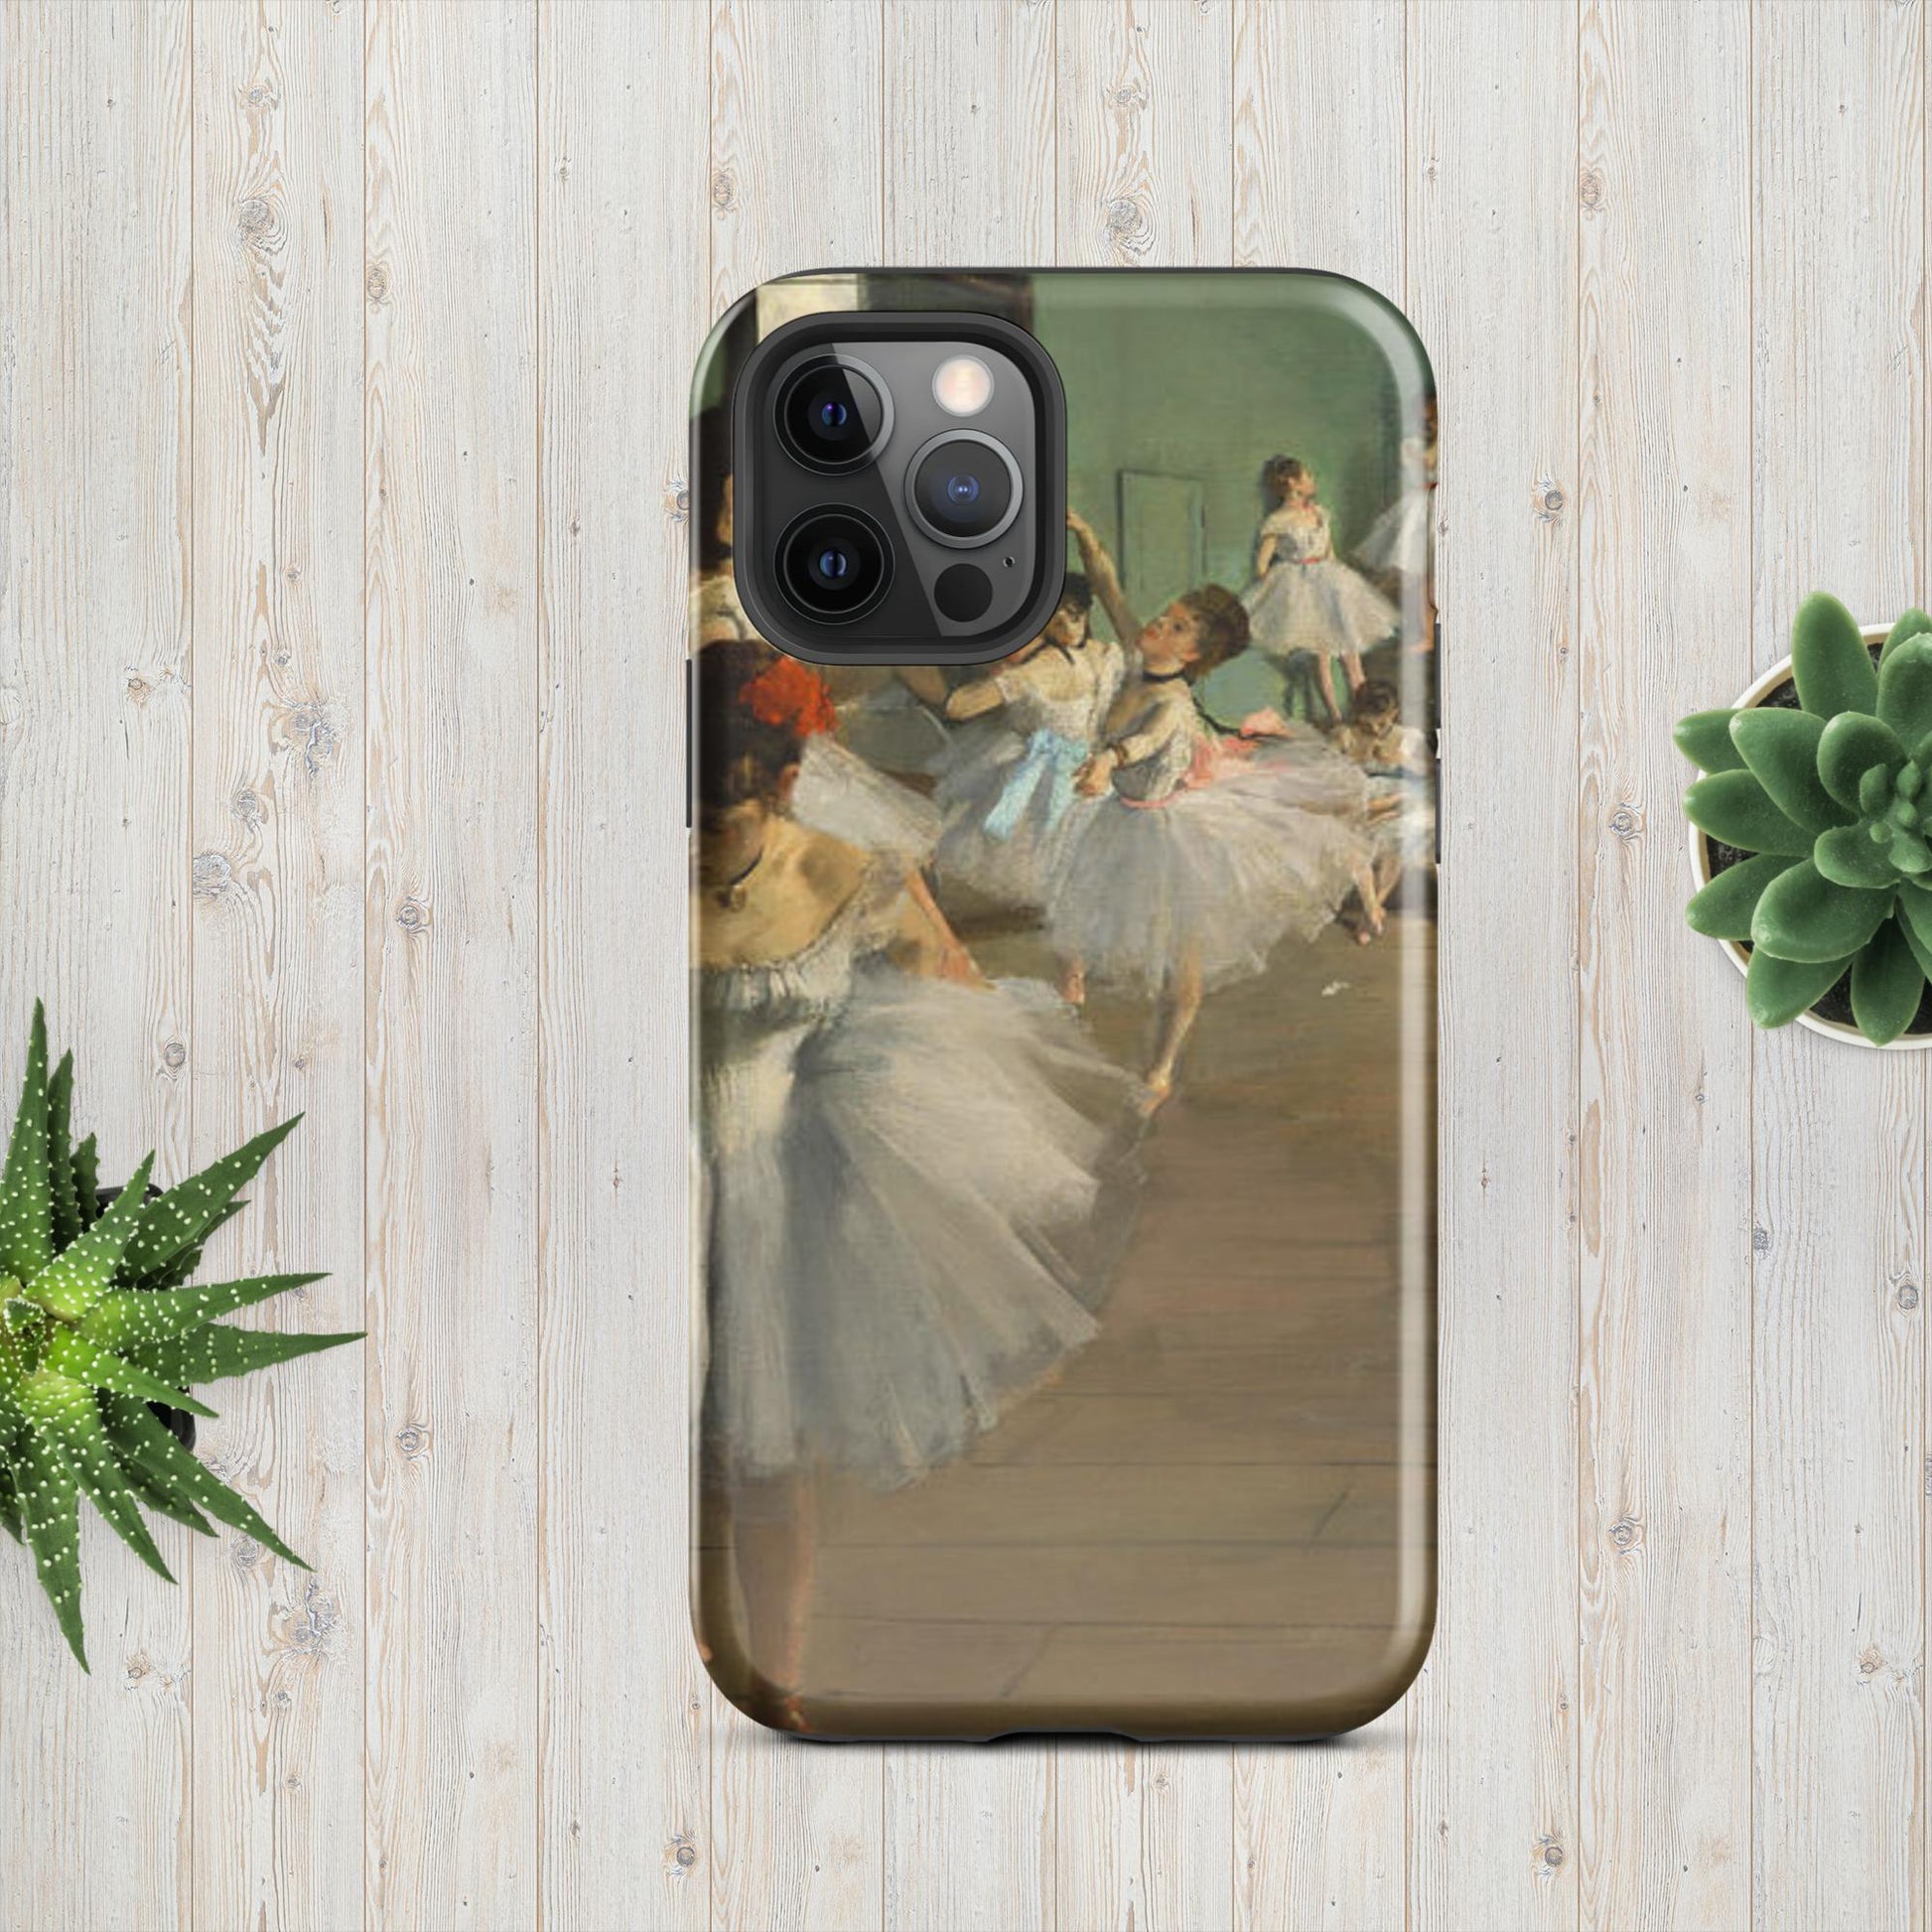 The Hologram Hook Up Glossy / iPhone 12 Pro Edgar's Dance Tough Case for iPhone®